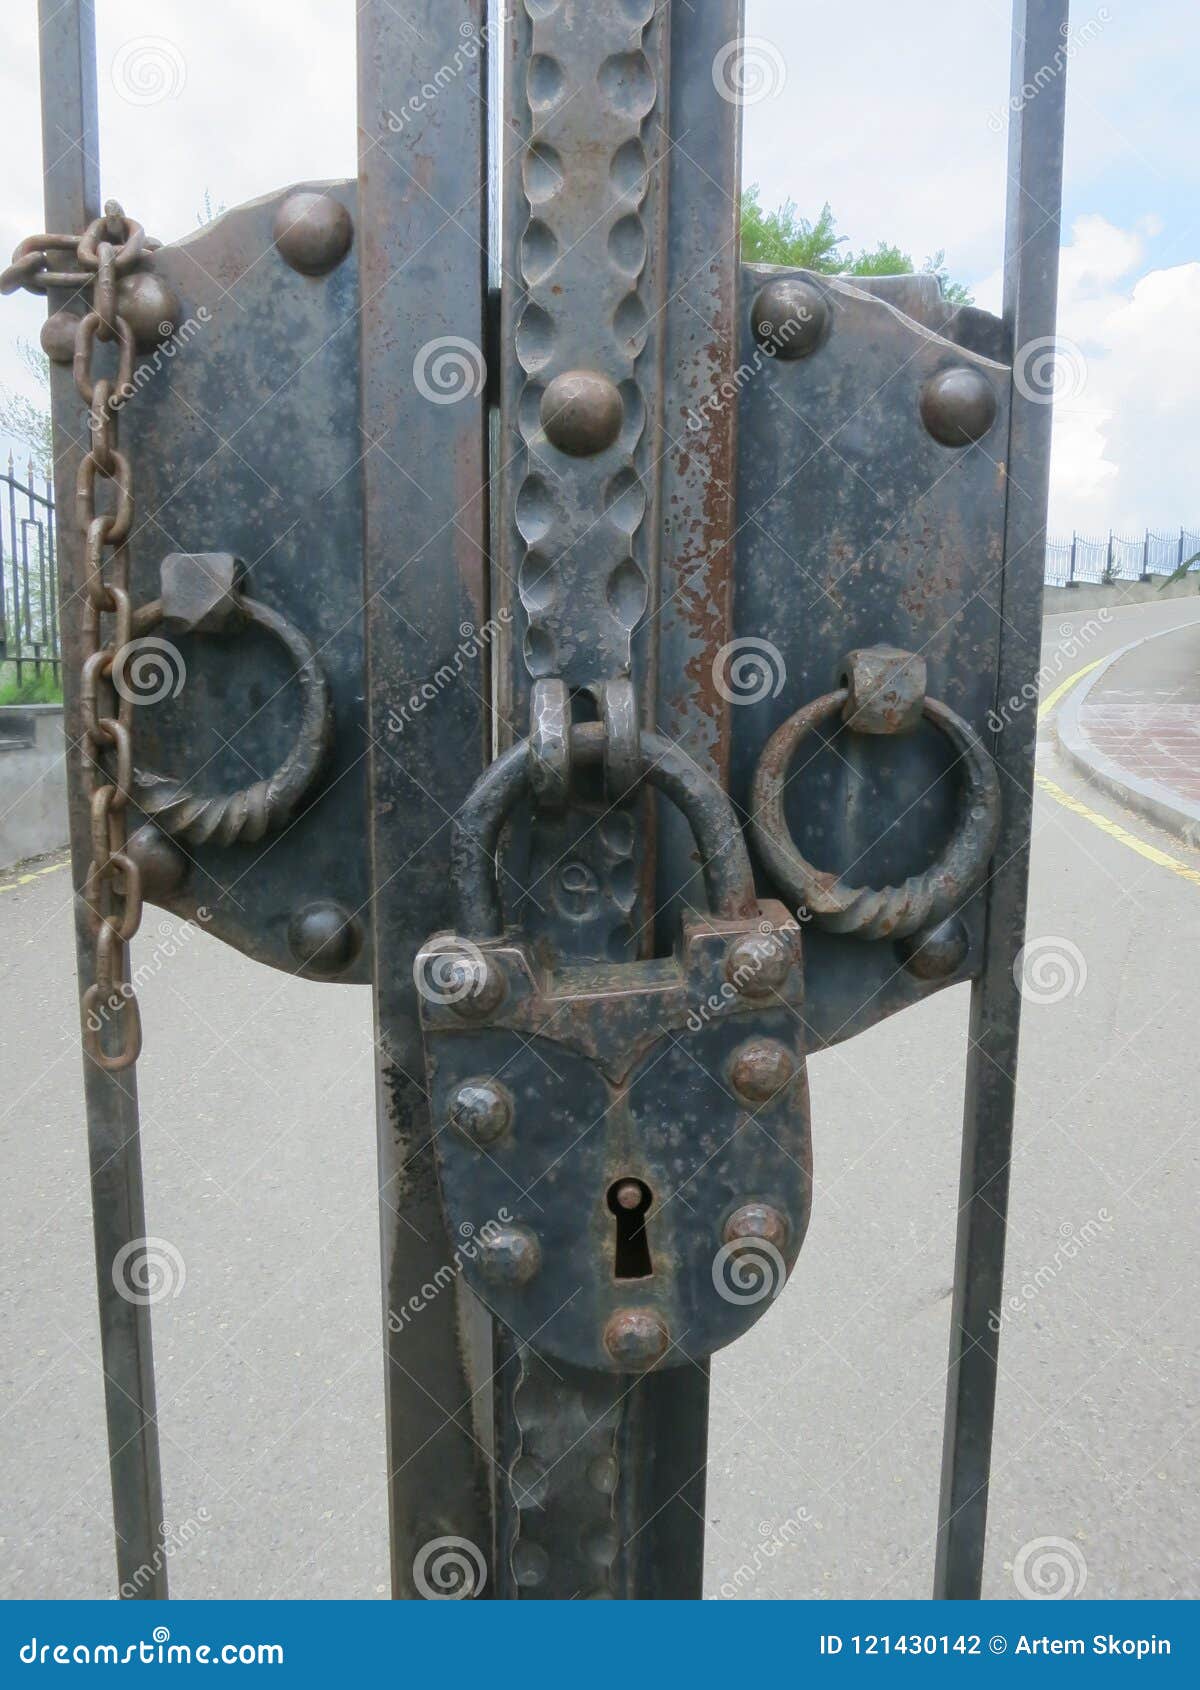 Large Iron Lock with Chains at the Entrance Gate Stock Photo - Image of ...